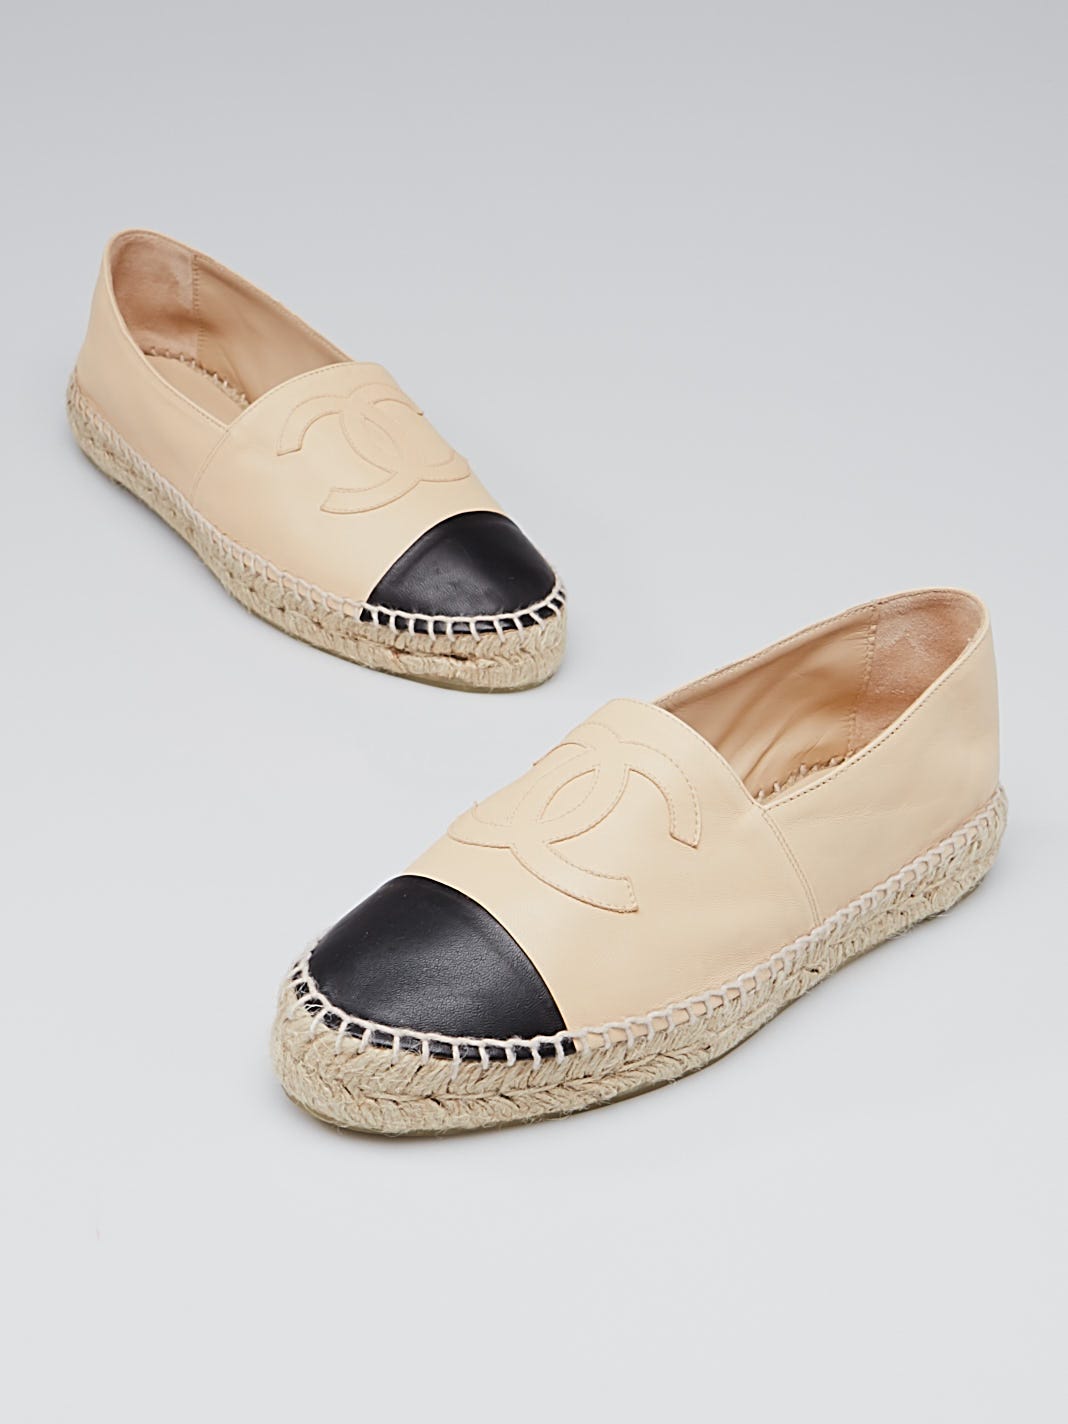 chanel flats beige and black